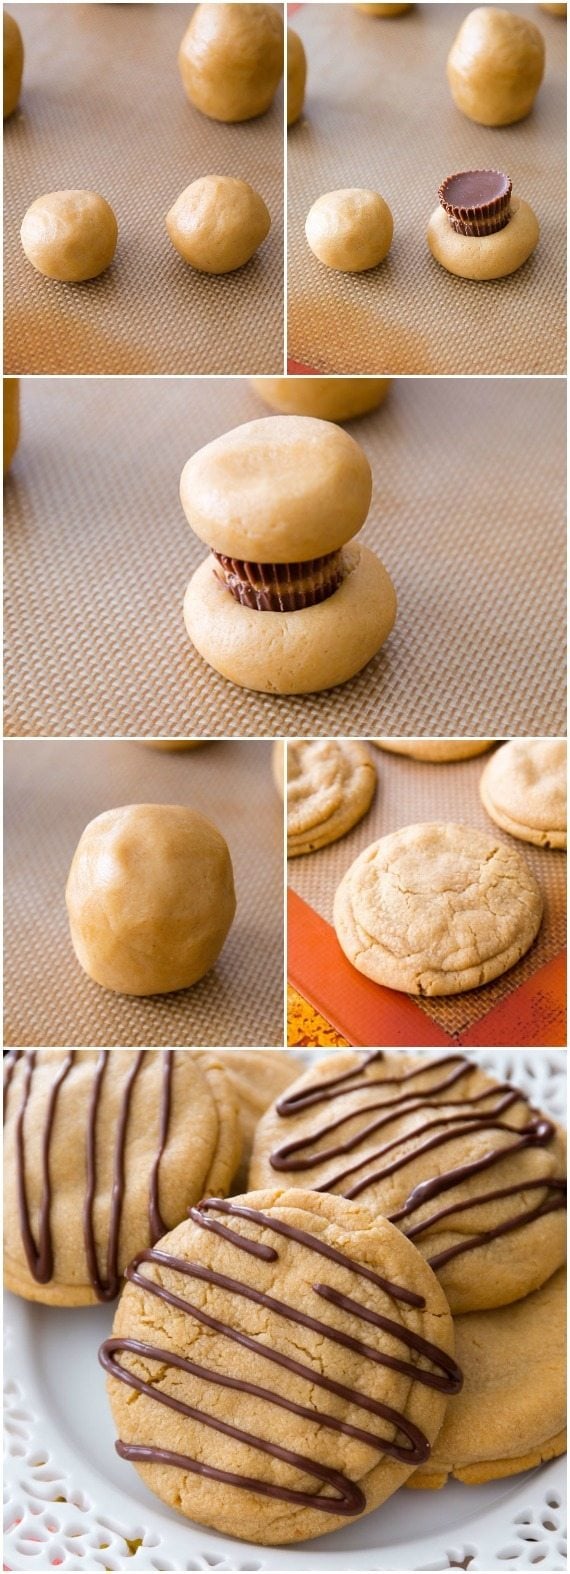 collage of 6 images showing steps for making Reese's stuffed peanut butter cookies